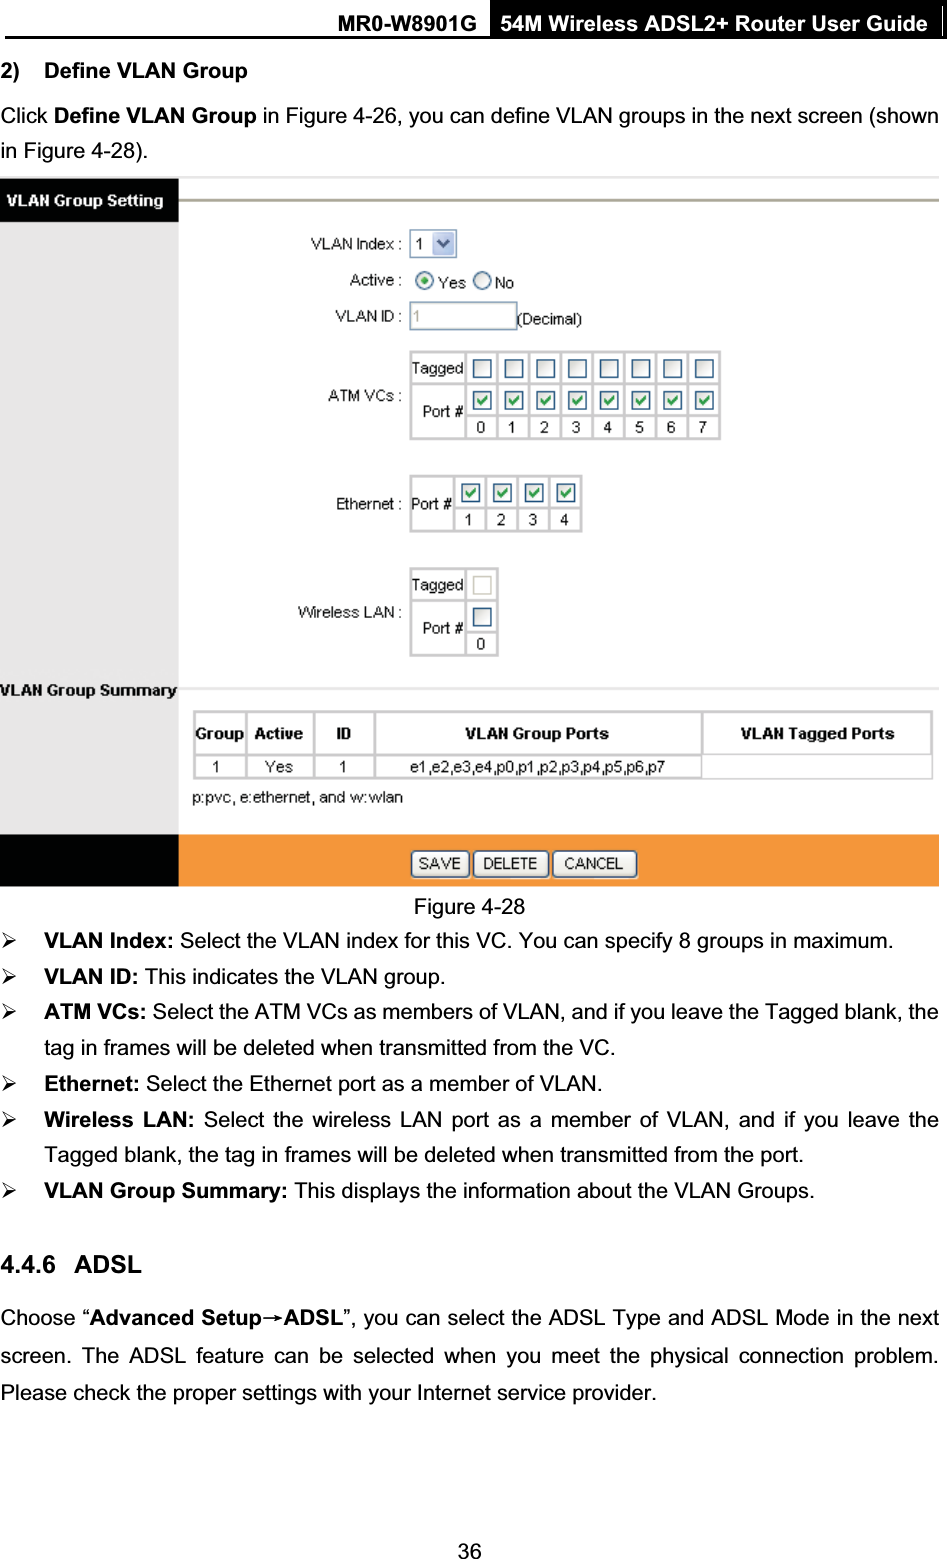 MR0-W8901G 54M Wireless ADSL2+ Router User Guide362)  Define VLAN Group   Click Define VLAN Group in Figure 4-26, you can define VLAN groups in the next screen (shown in Figure 4-28). Figure 4-28 ¾VLAN Index: Select the VLAN index for this VC. You can specify 8 groups in maximum. ¾VLAN ID: This indicates the VLAN group. ¾ATM VCs: Select the ATM VCs as members of VLAN, and if you leave the Tagged blank, the tag in frames will be deleted when transmitted from the VC. ¾Ethernet: Select the Ethernet port as a member of VLAN. ¾Wireless LAN: Select the wireless LAN port as a member of VLAN, and if you leave the Tagged blank, the tag in frames will be deleted when transmitted from the port.¾VLAN Group Summary: This displays the information about the VLAN Groups. 4.4.6 ADSLChoose “Advanced SetupėADSL”, you can select the ADSL Type and ADSL Mode in the next screen. The ADSL feature can be selected when you meet the physical connection problem. Please check the proper settings with your Internet service provider. 